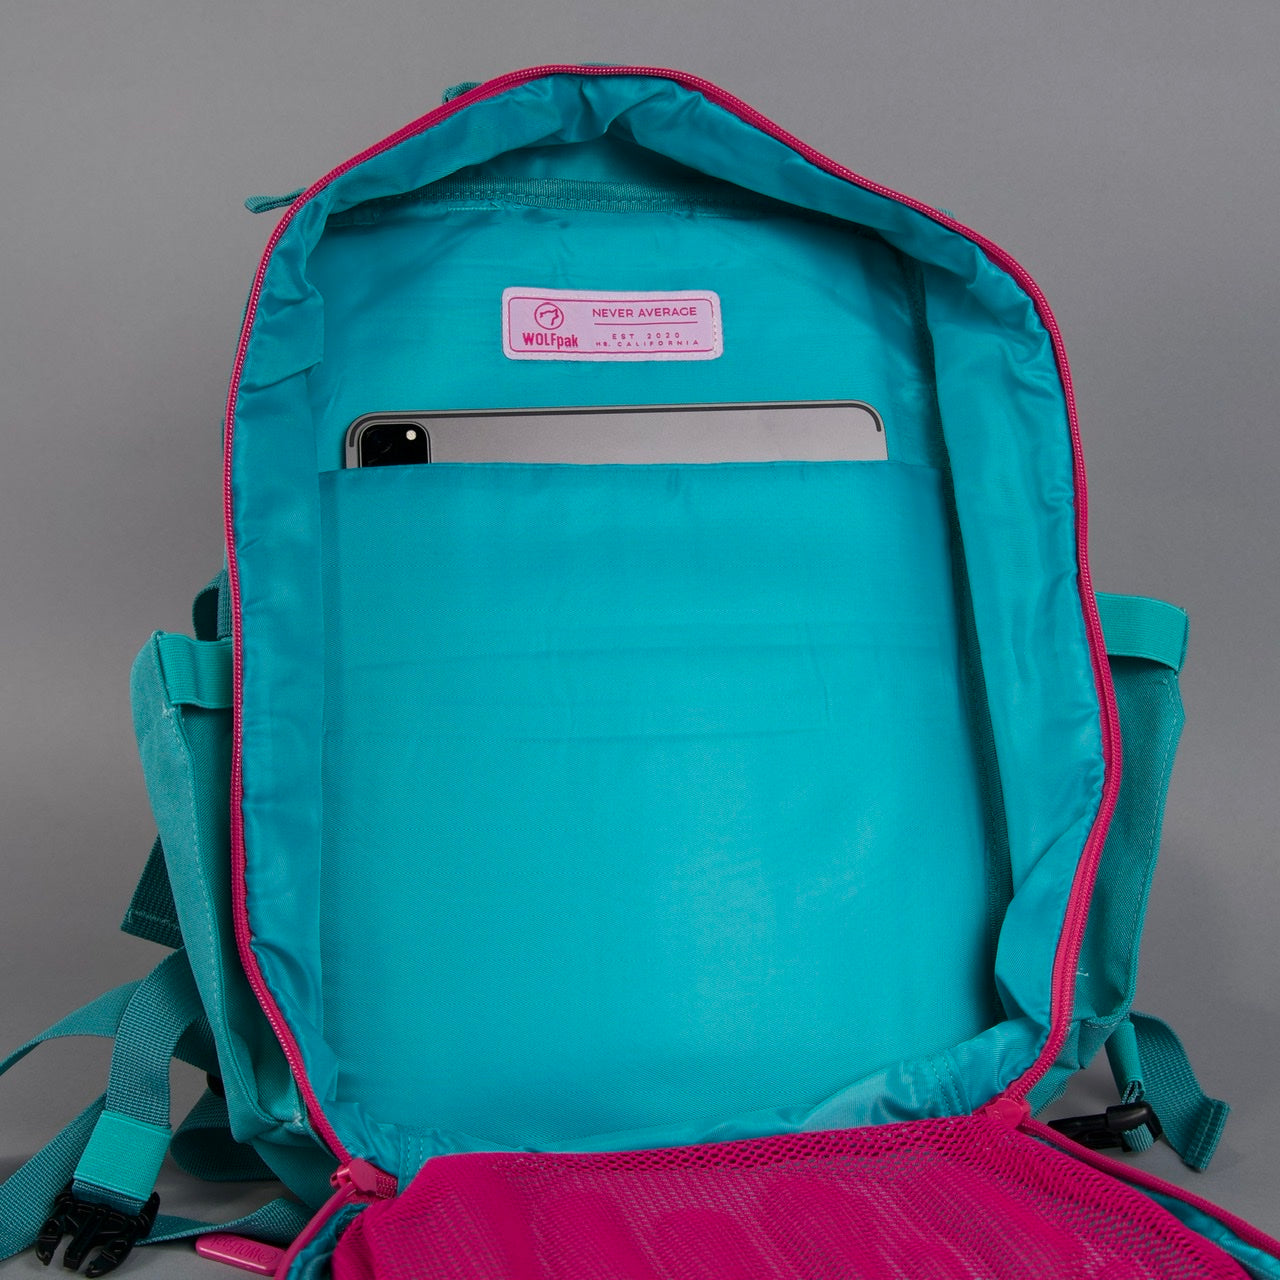 25L Backpack Miami Vice